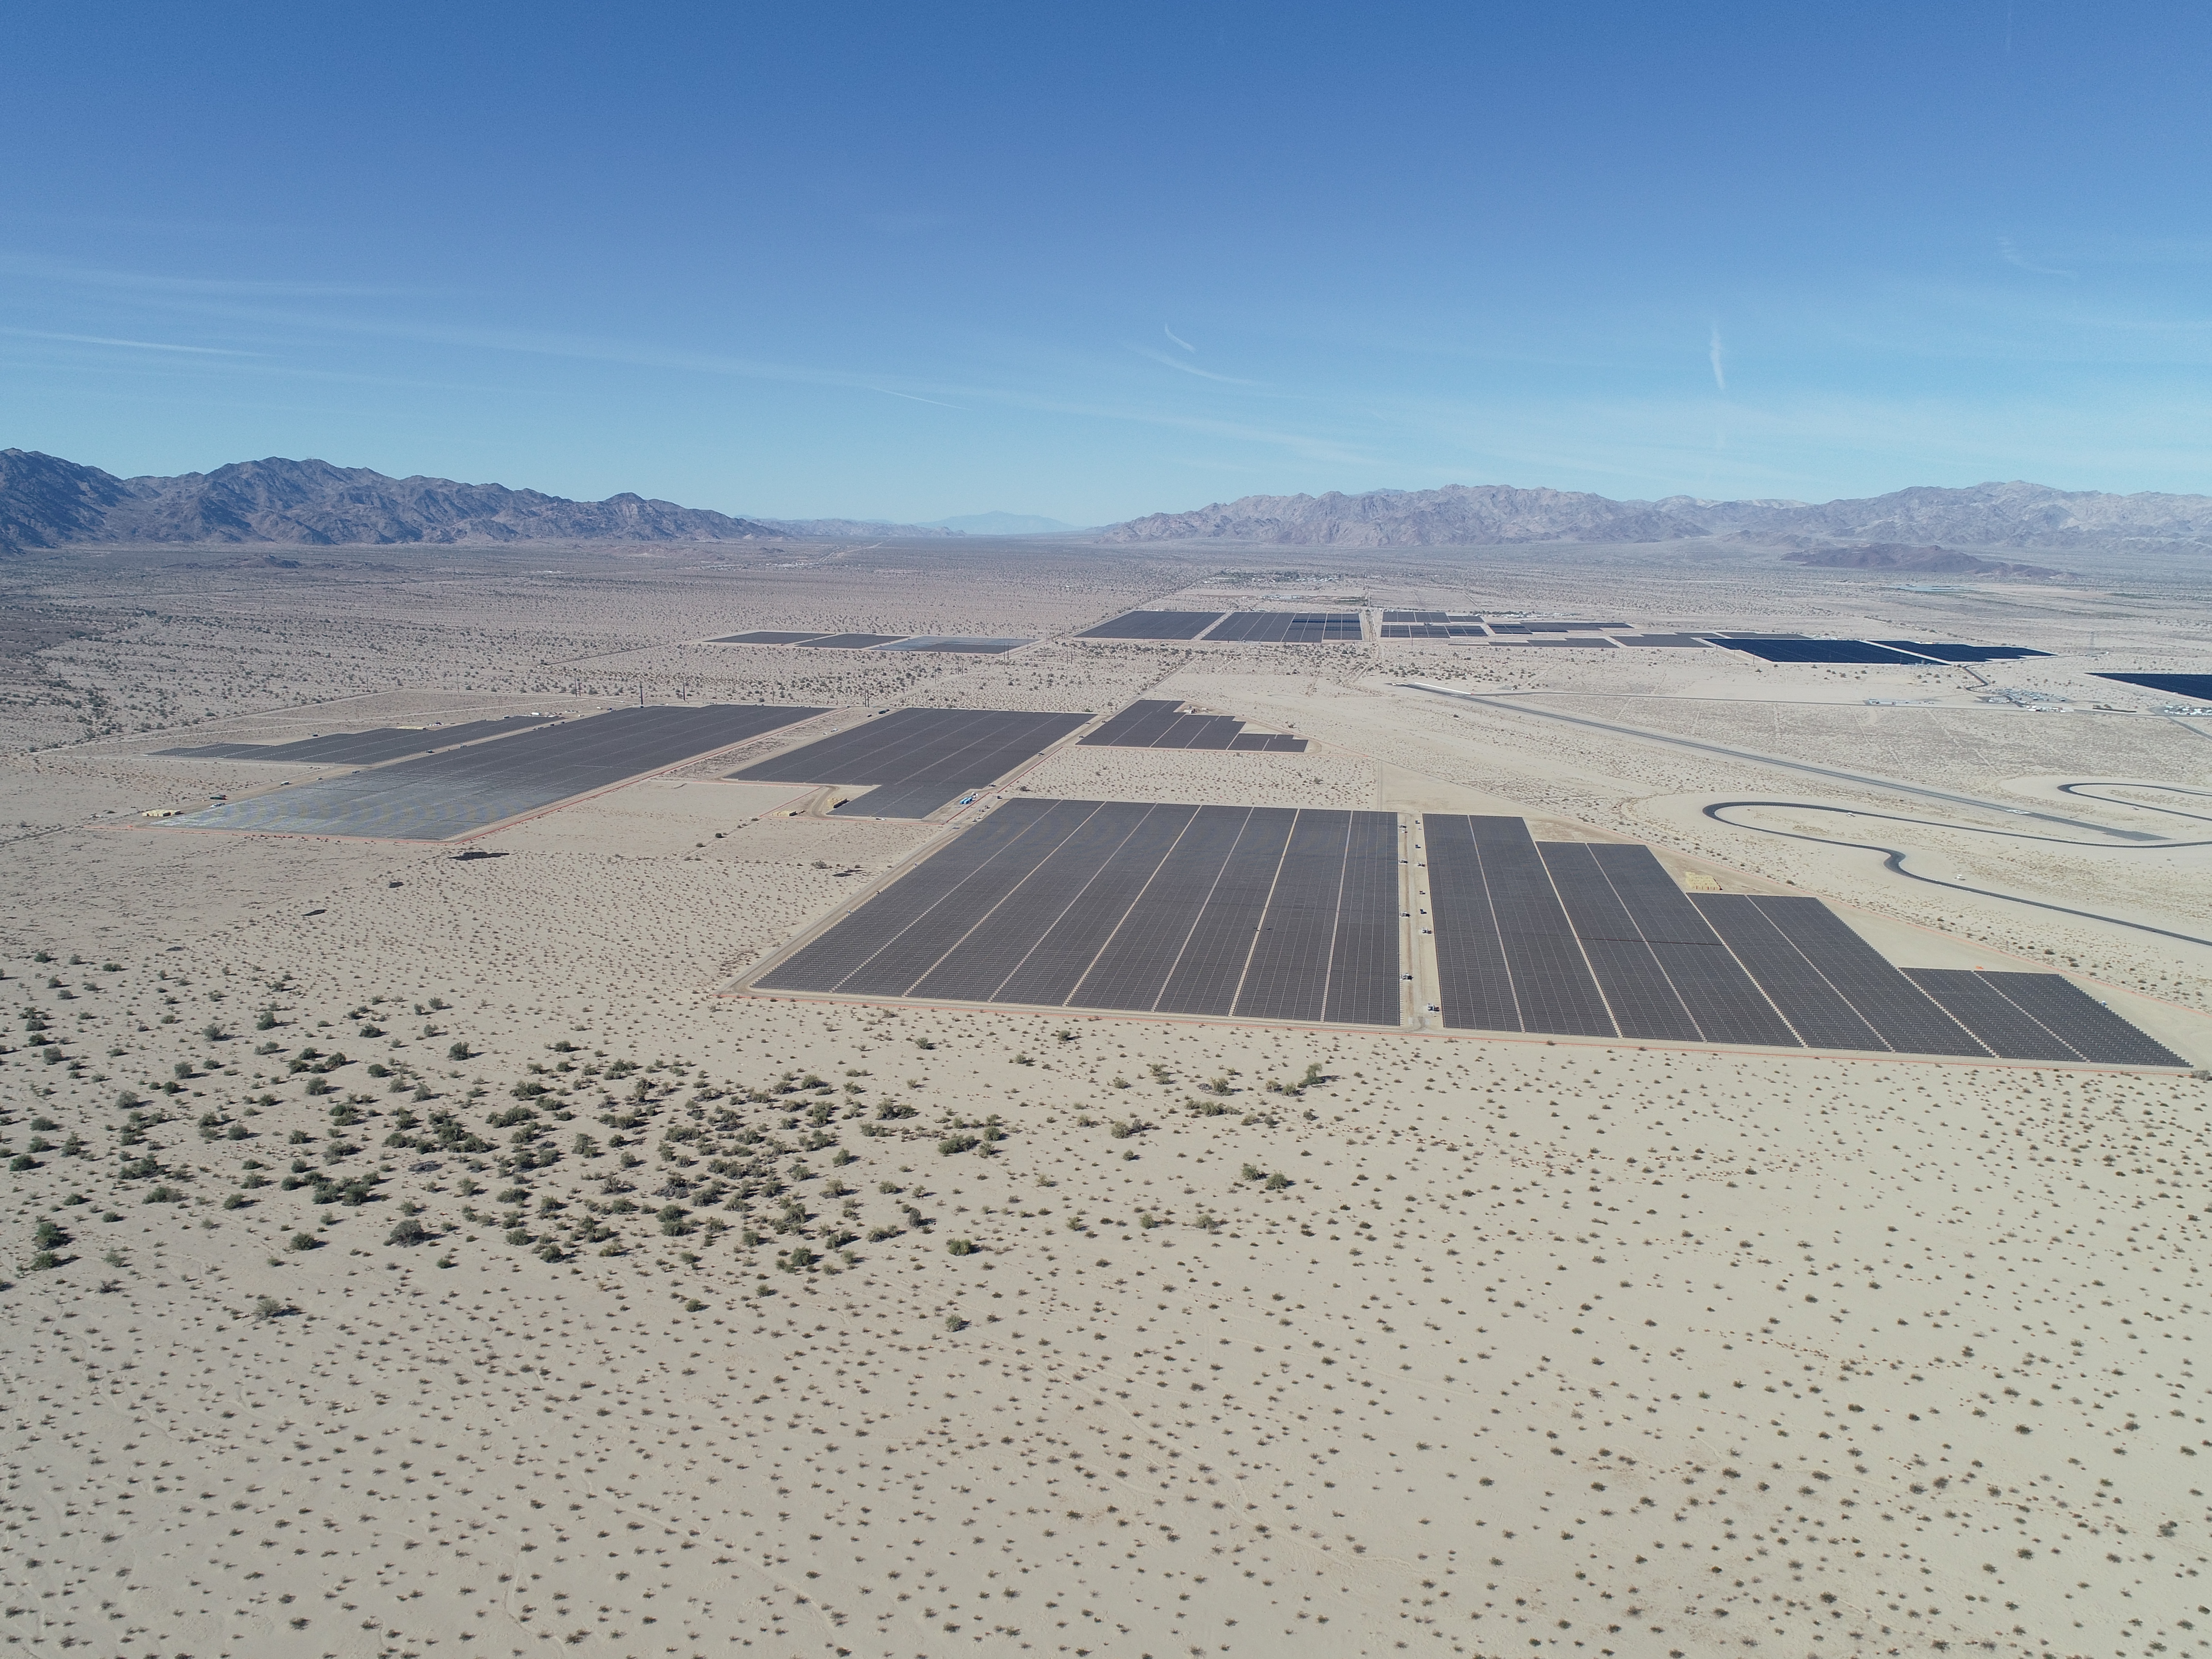 Athos I & II solar project covers nearly 5-square miles with over 450 MW of solar. 